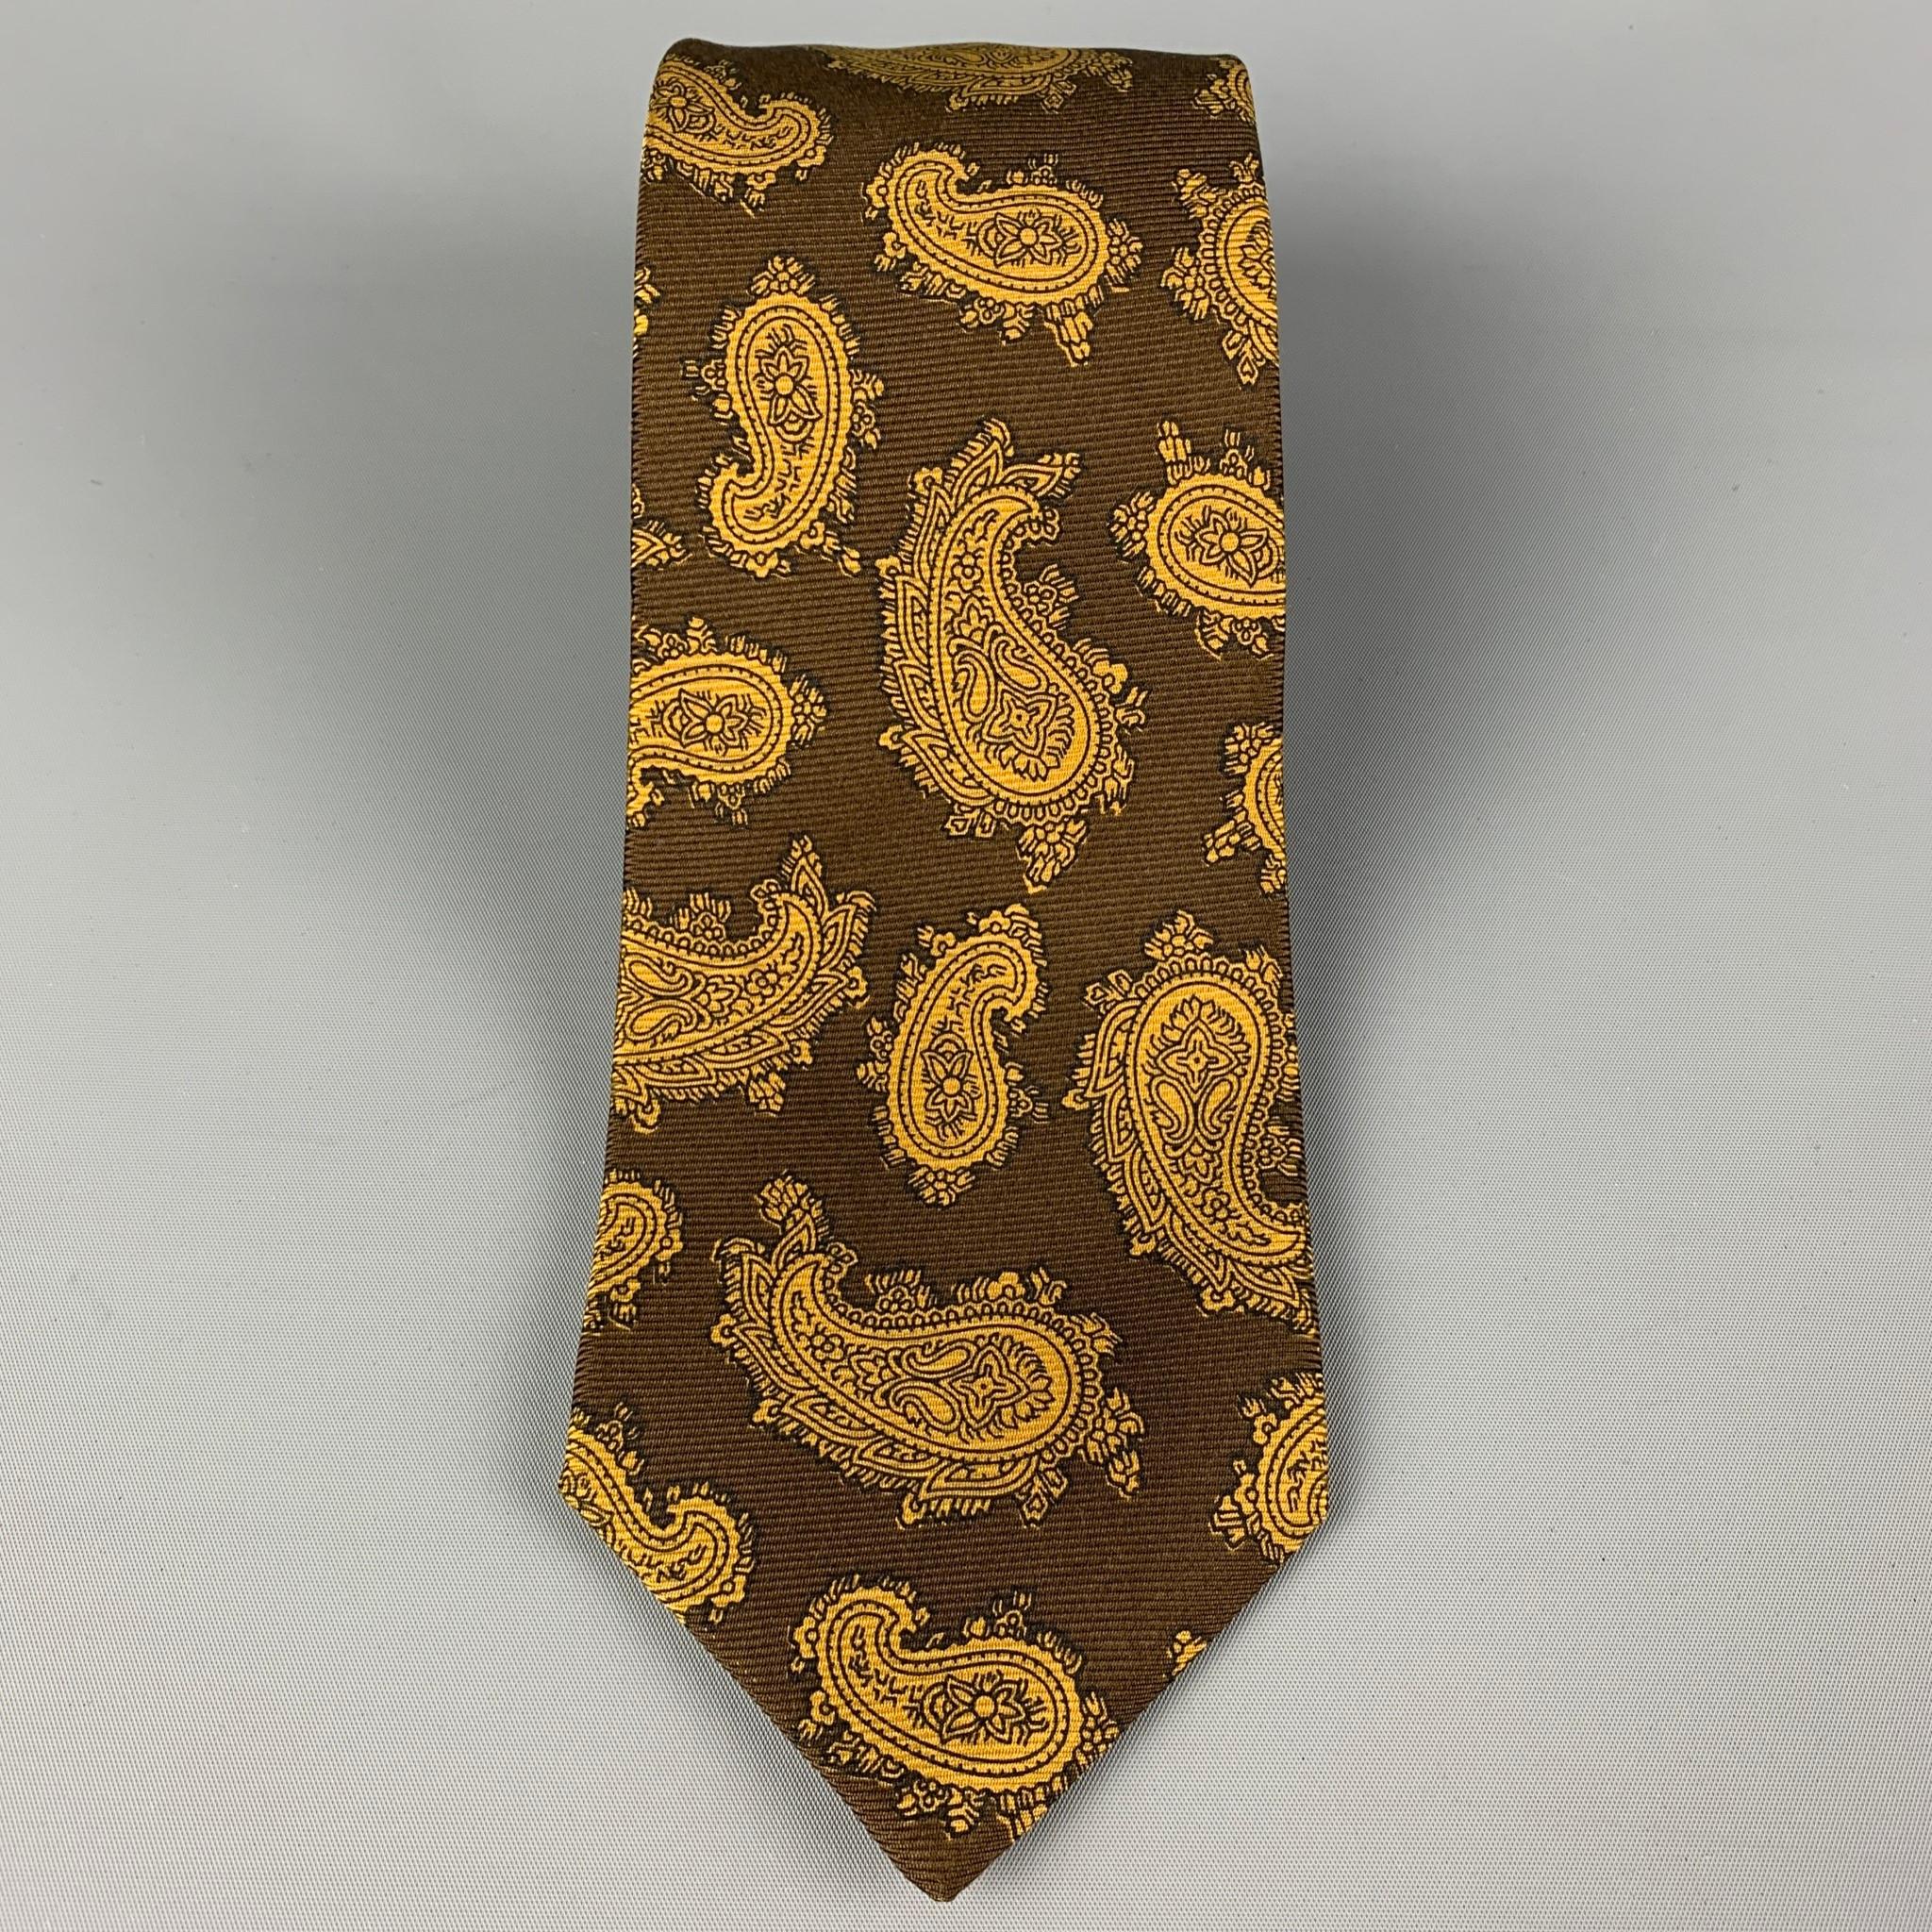 KITON necktie comes in a brown & mustard silk with a all over paisley print. Made in Italy .

Very Good Pre-Owned Condition.
Original Retail Price: $345.00

Width: 4 in.
Length: 60 in. 

 